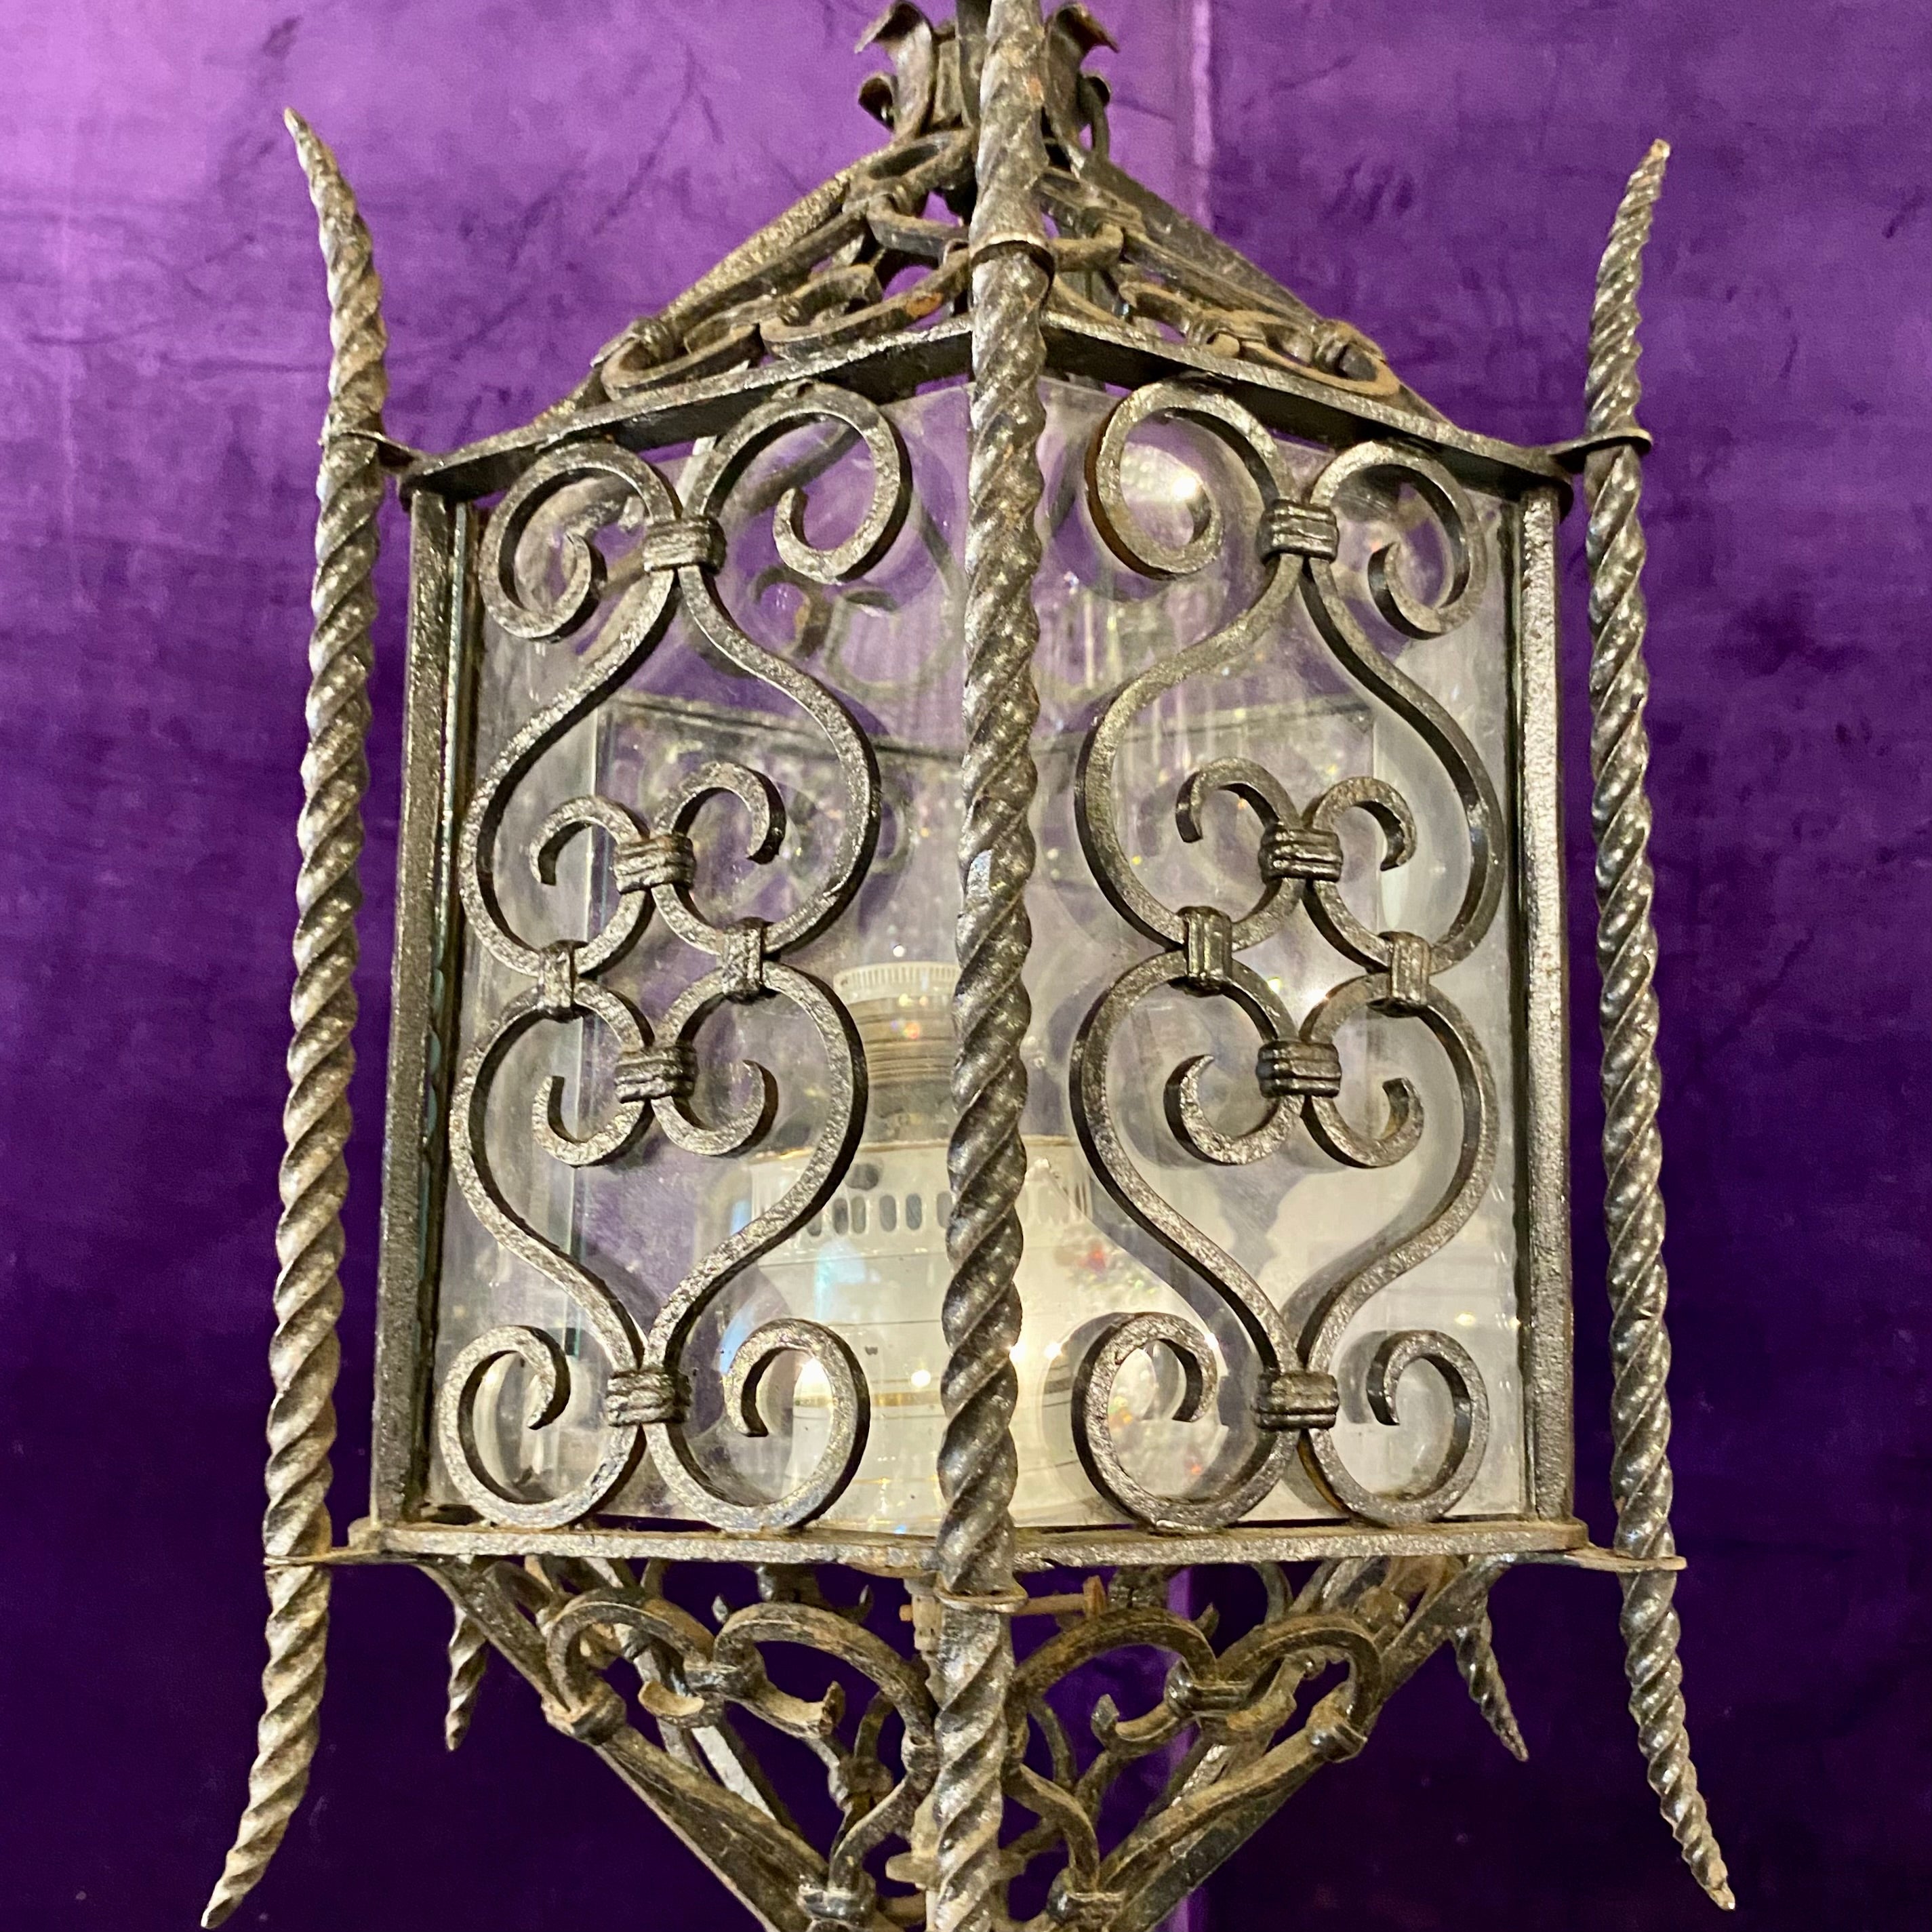 Antique French Wrought Iron and Brass Lantern